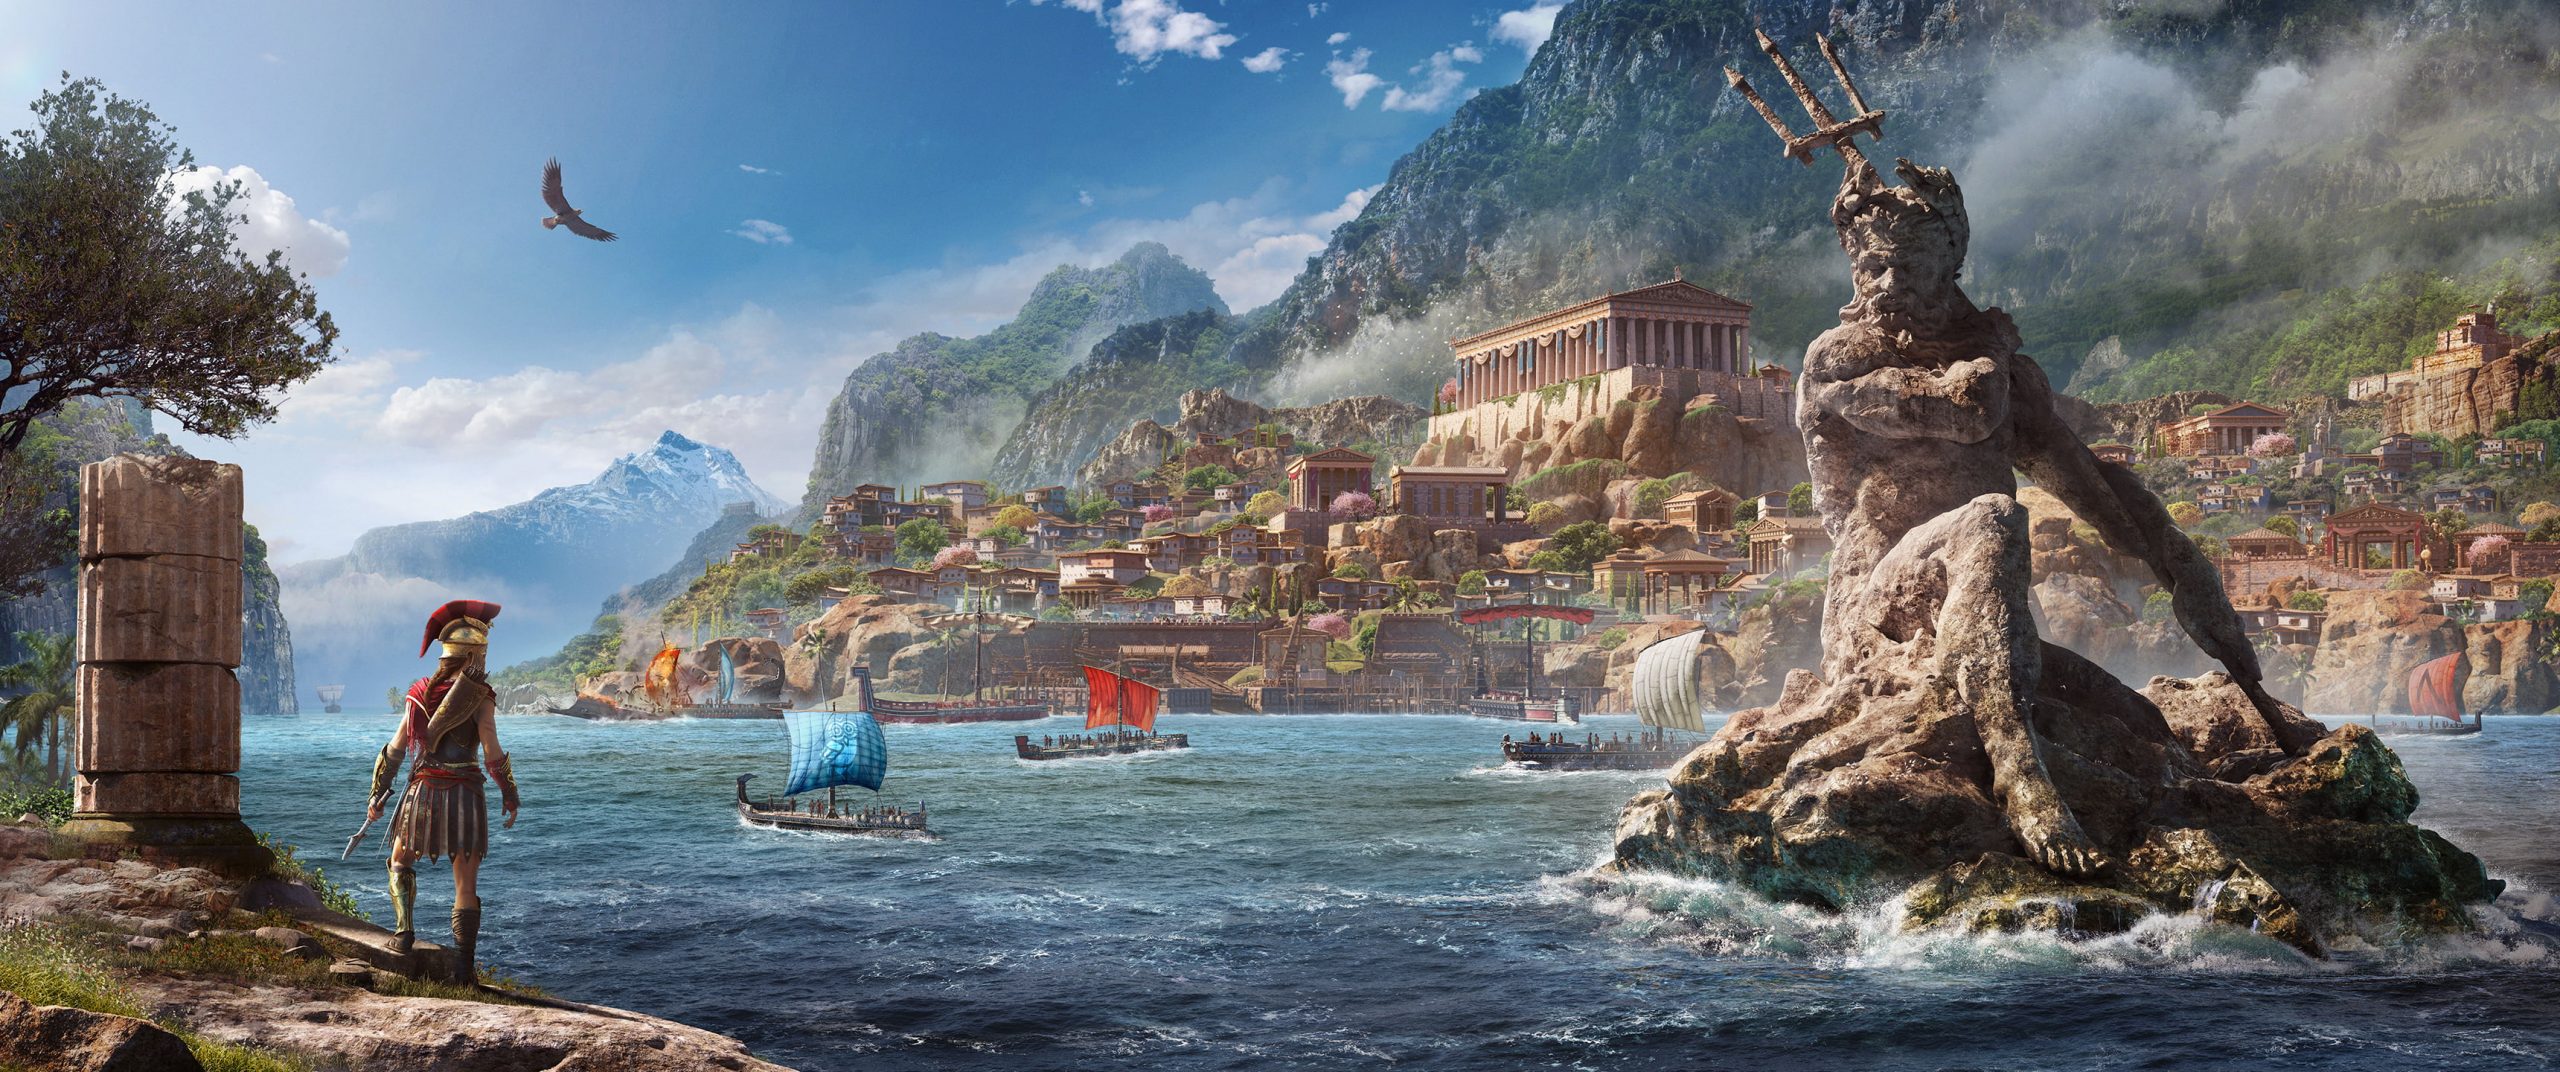 Video games wallpaper, Video Game Art, Assassin's Creed Odyssey, Greece